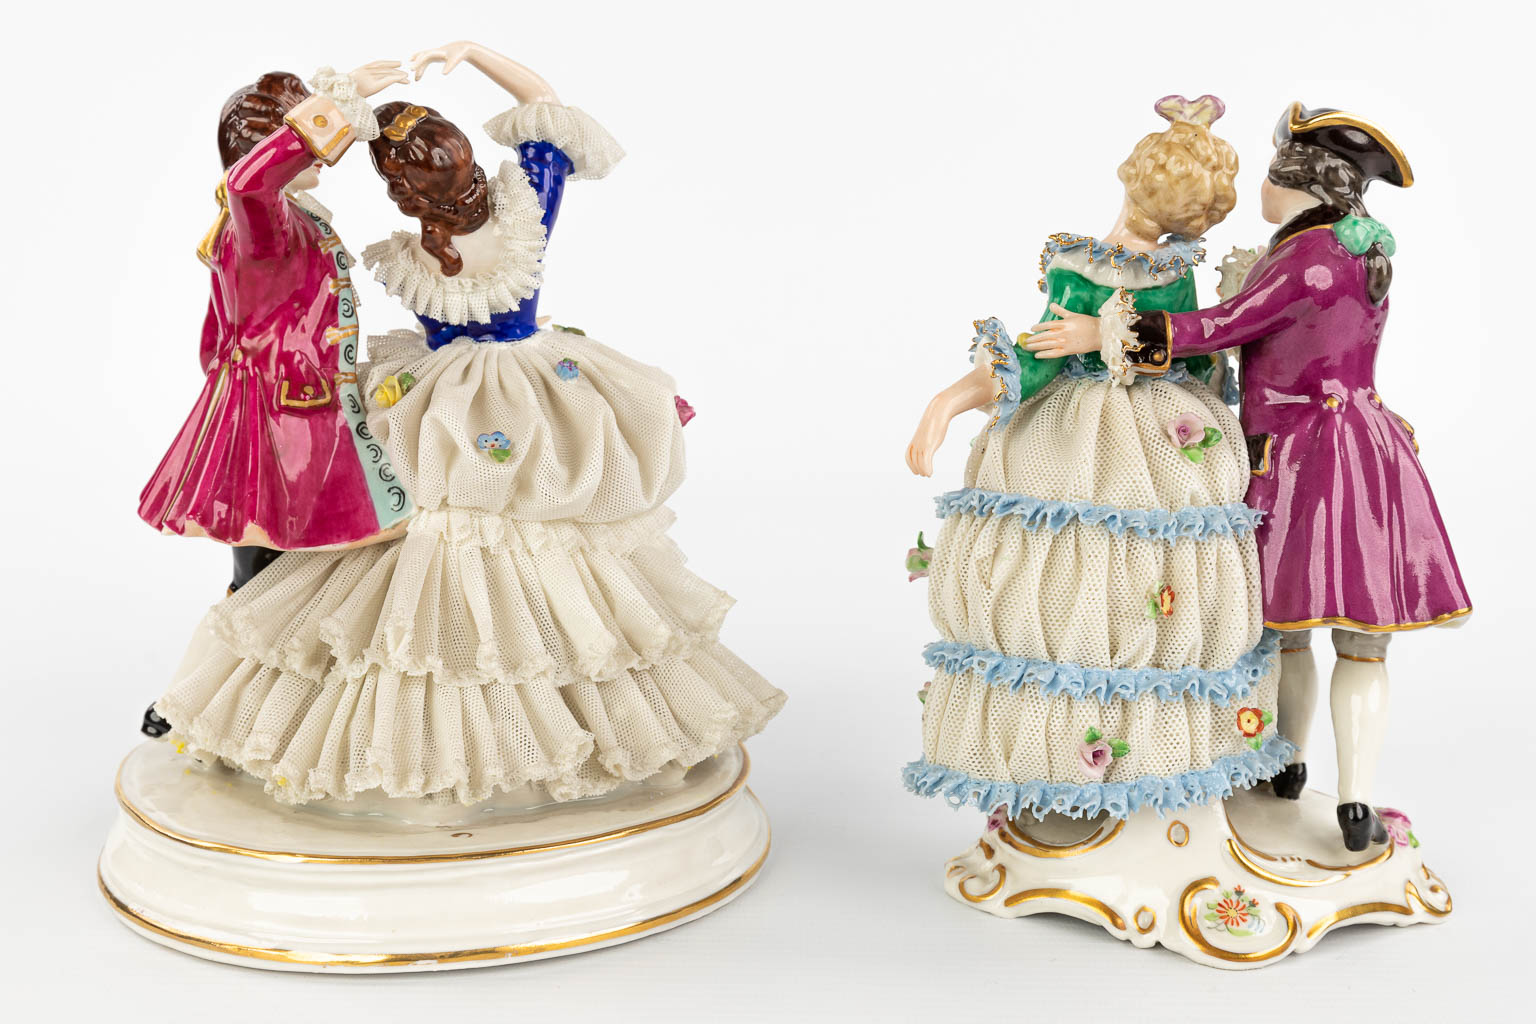 A pair of porcelain figurines with a lace dress. Made in Germany and marked Dresden. (H:19cm)